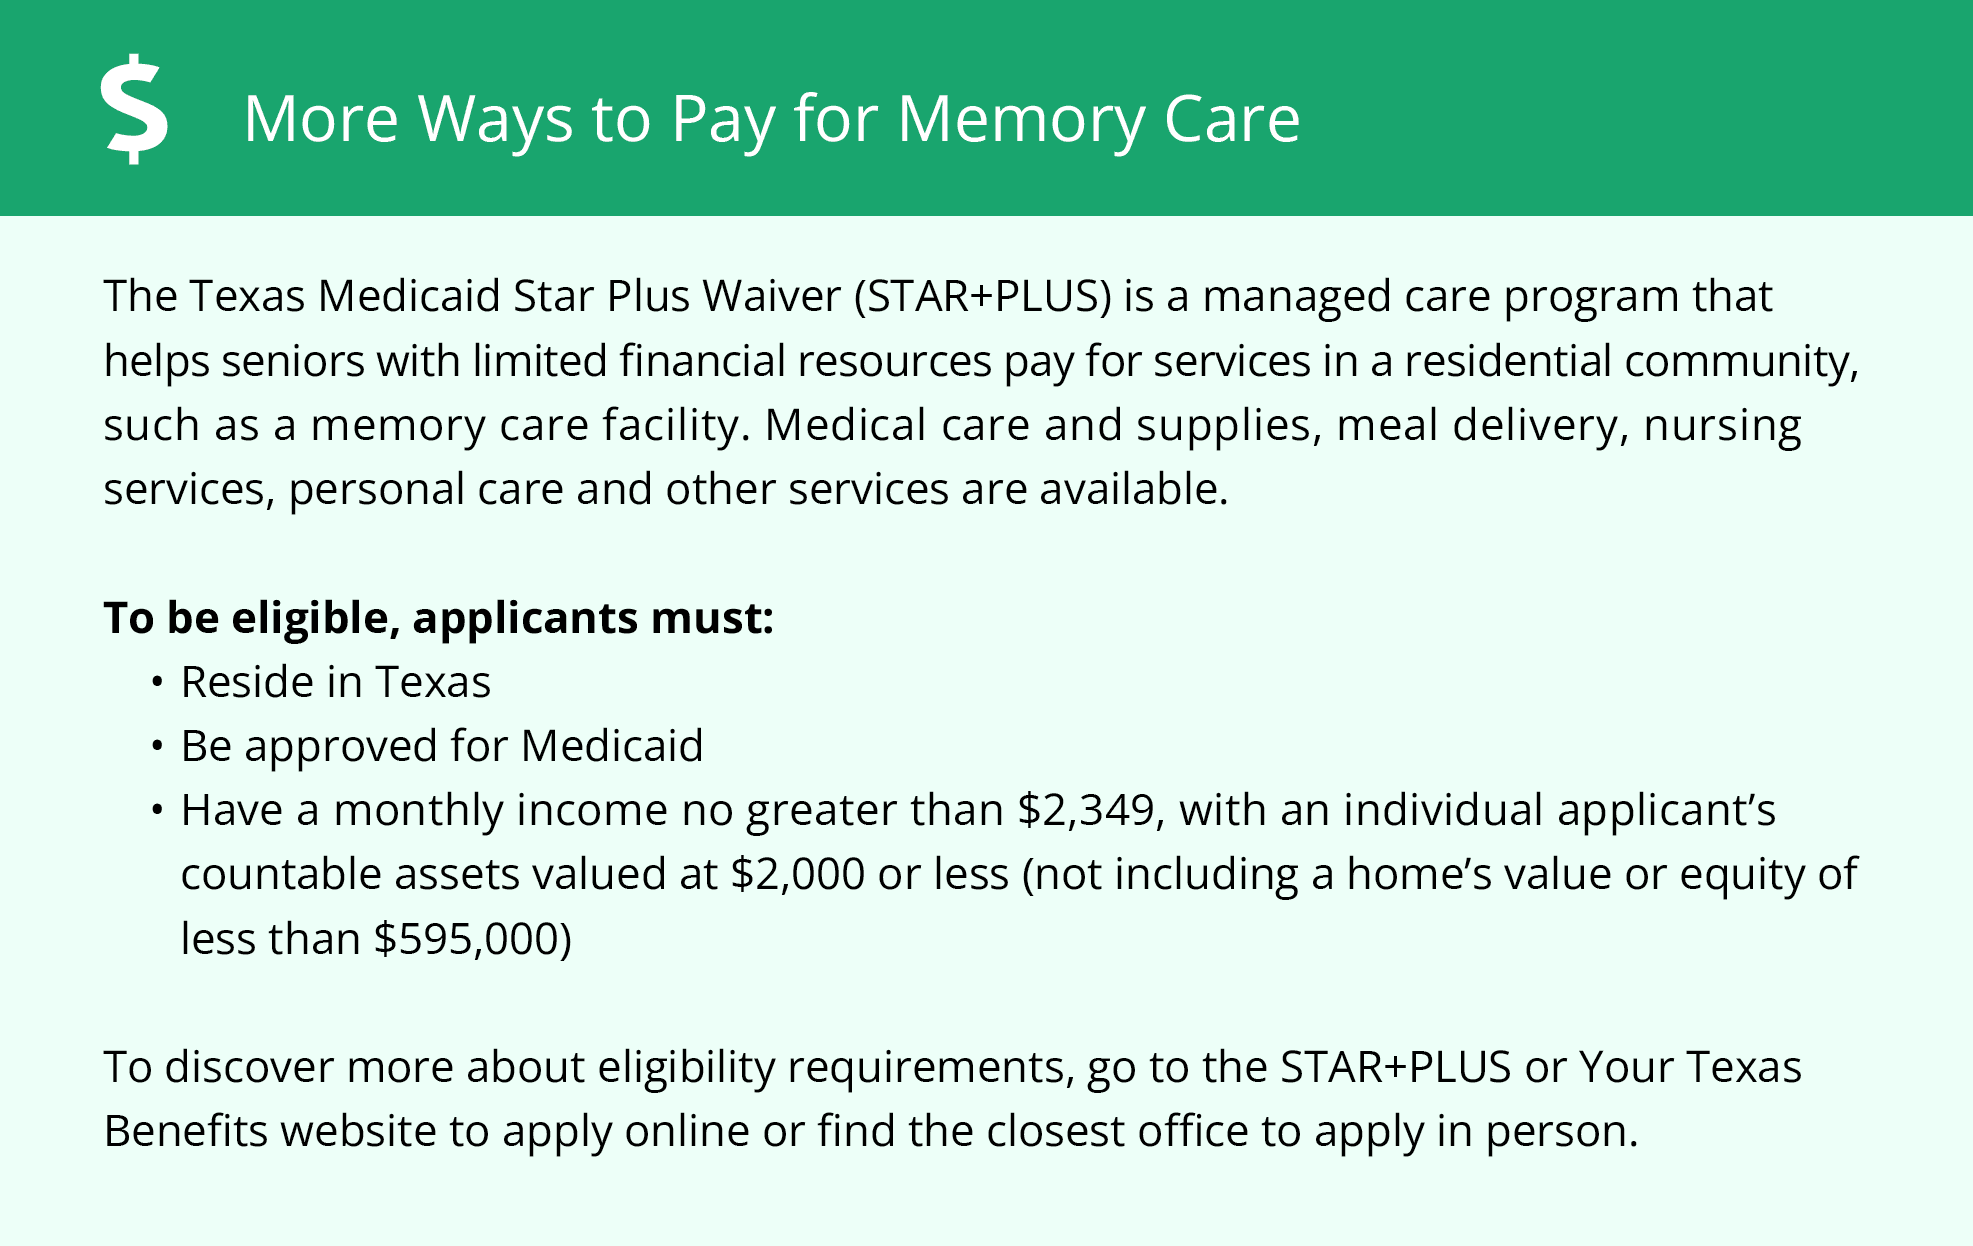 Financial Assistance for Memory Care in Texas